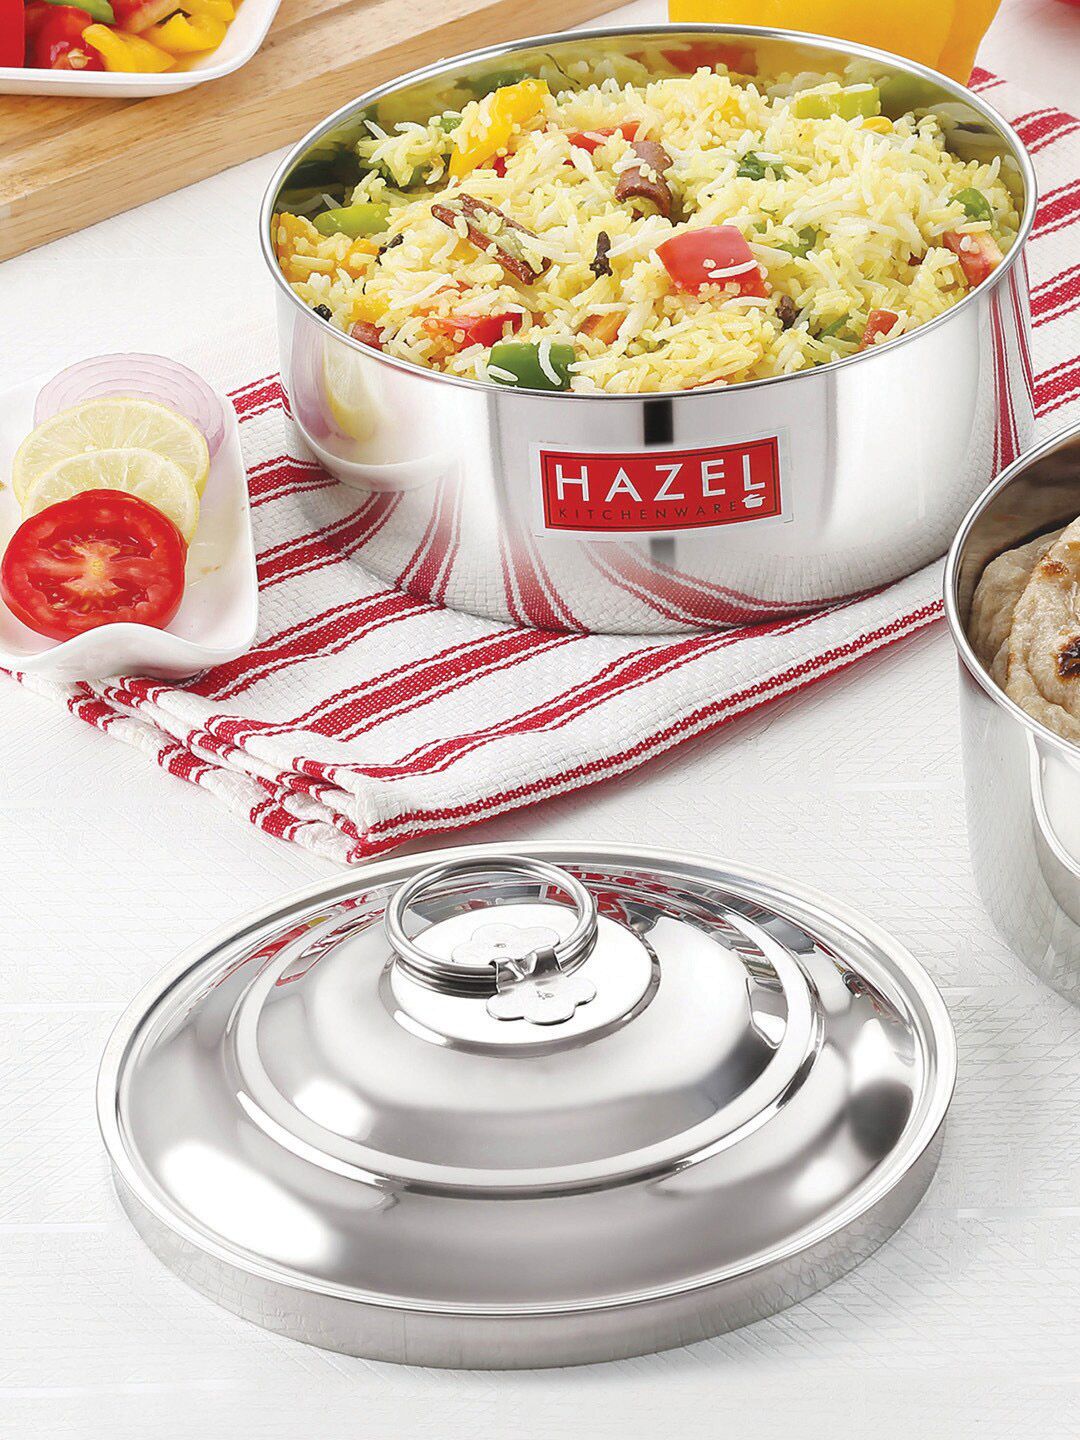 HAZEL Silver-Toned Solid Stainless Steel Flat Bottom Casserole 1550 ml Price in India